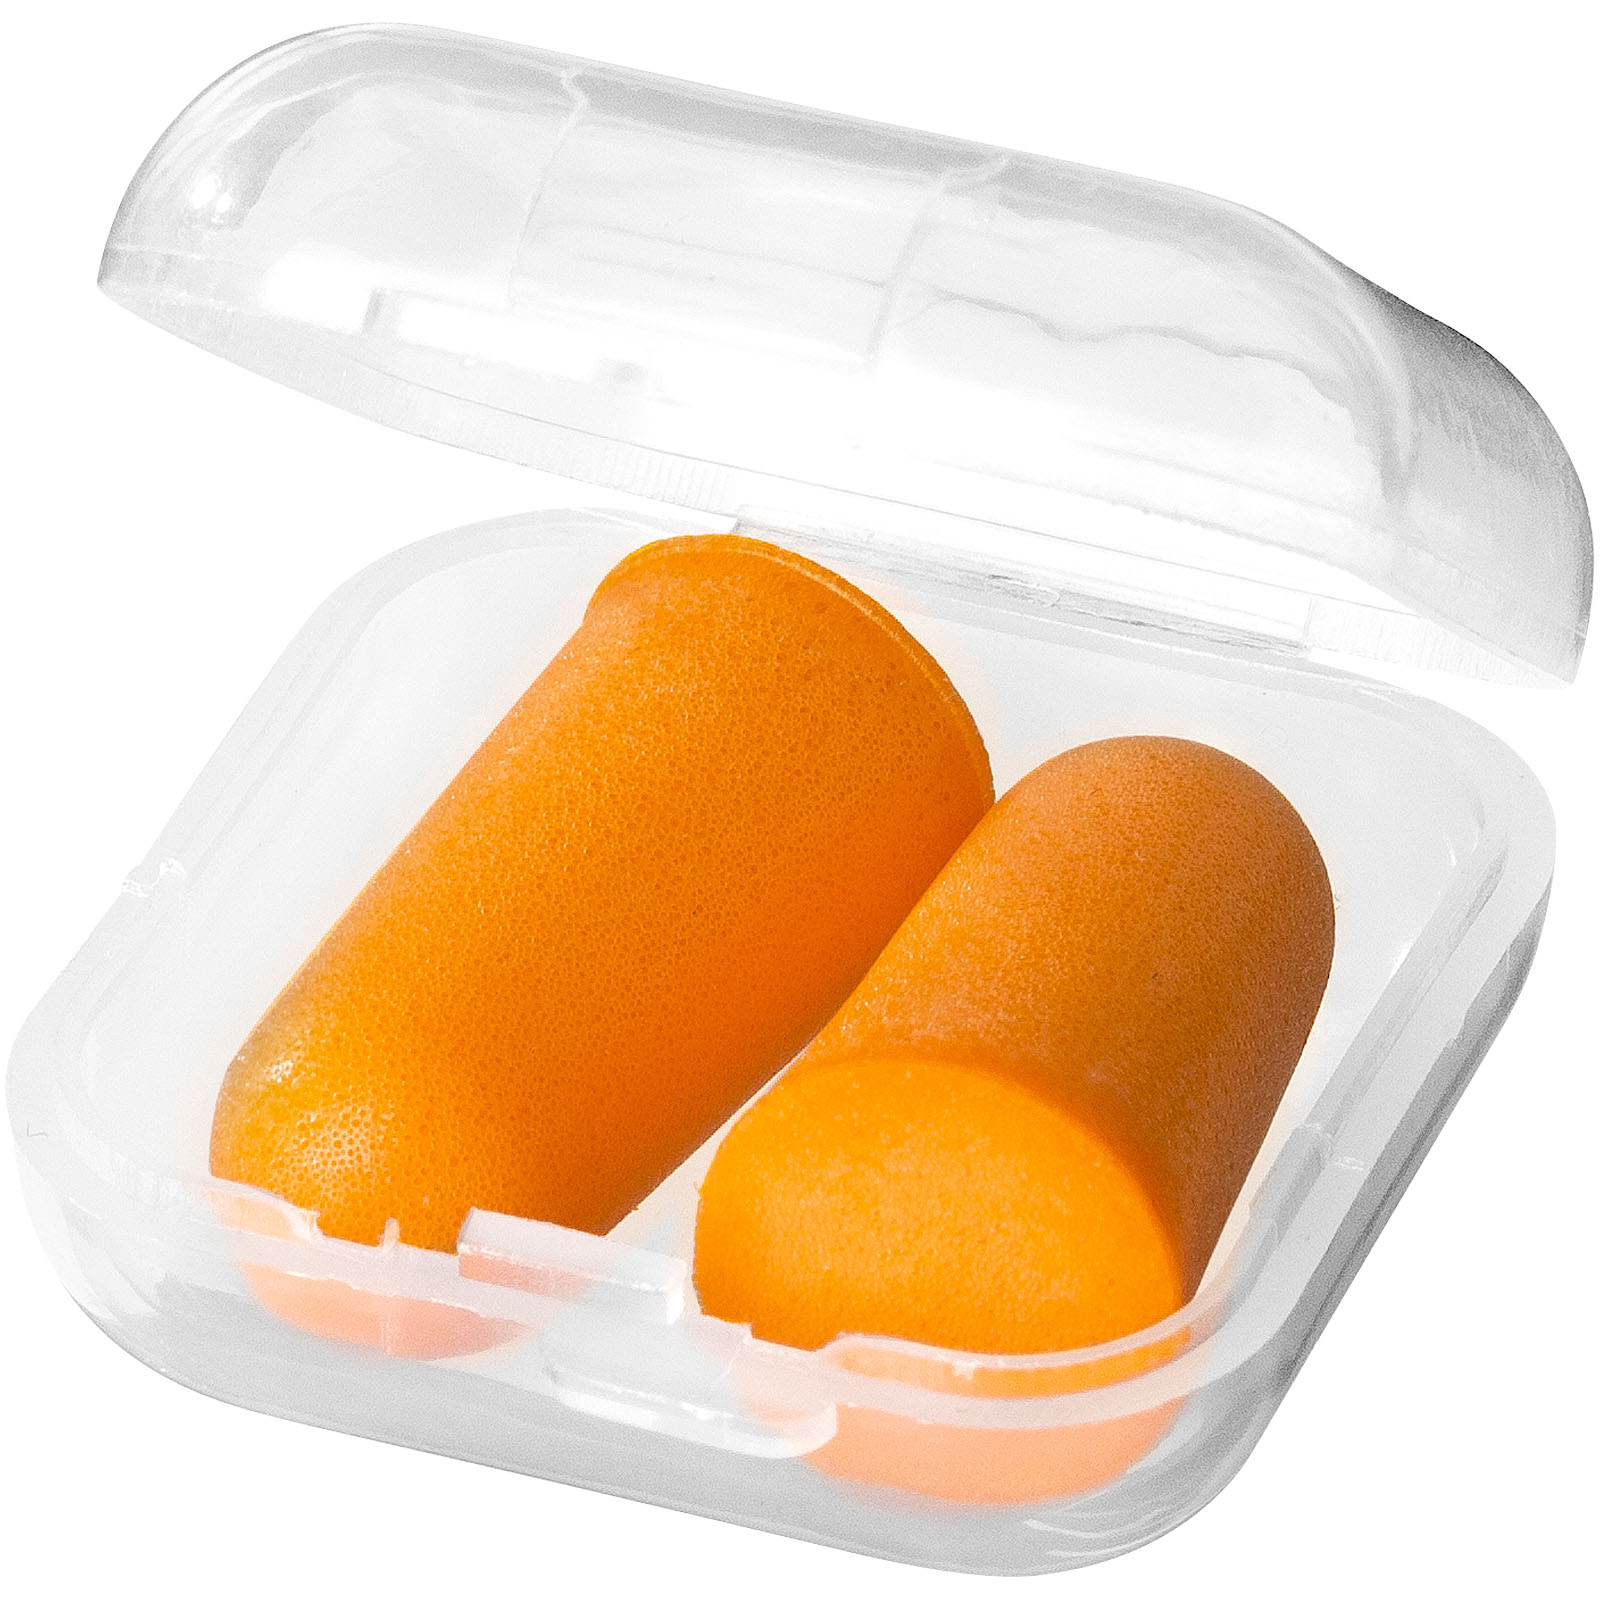 Travel Accessories - Serenity earplugs with travel case